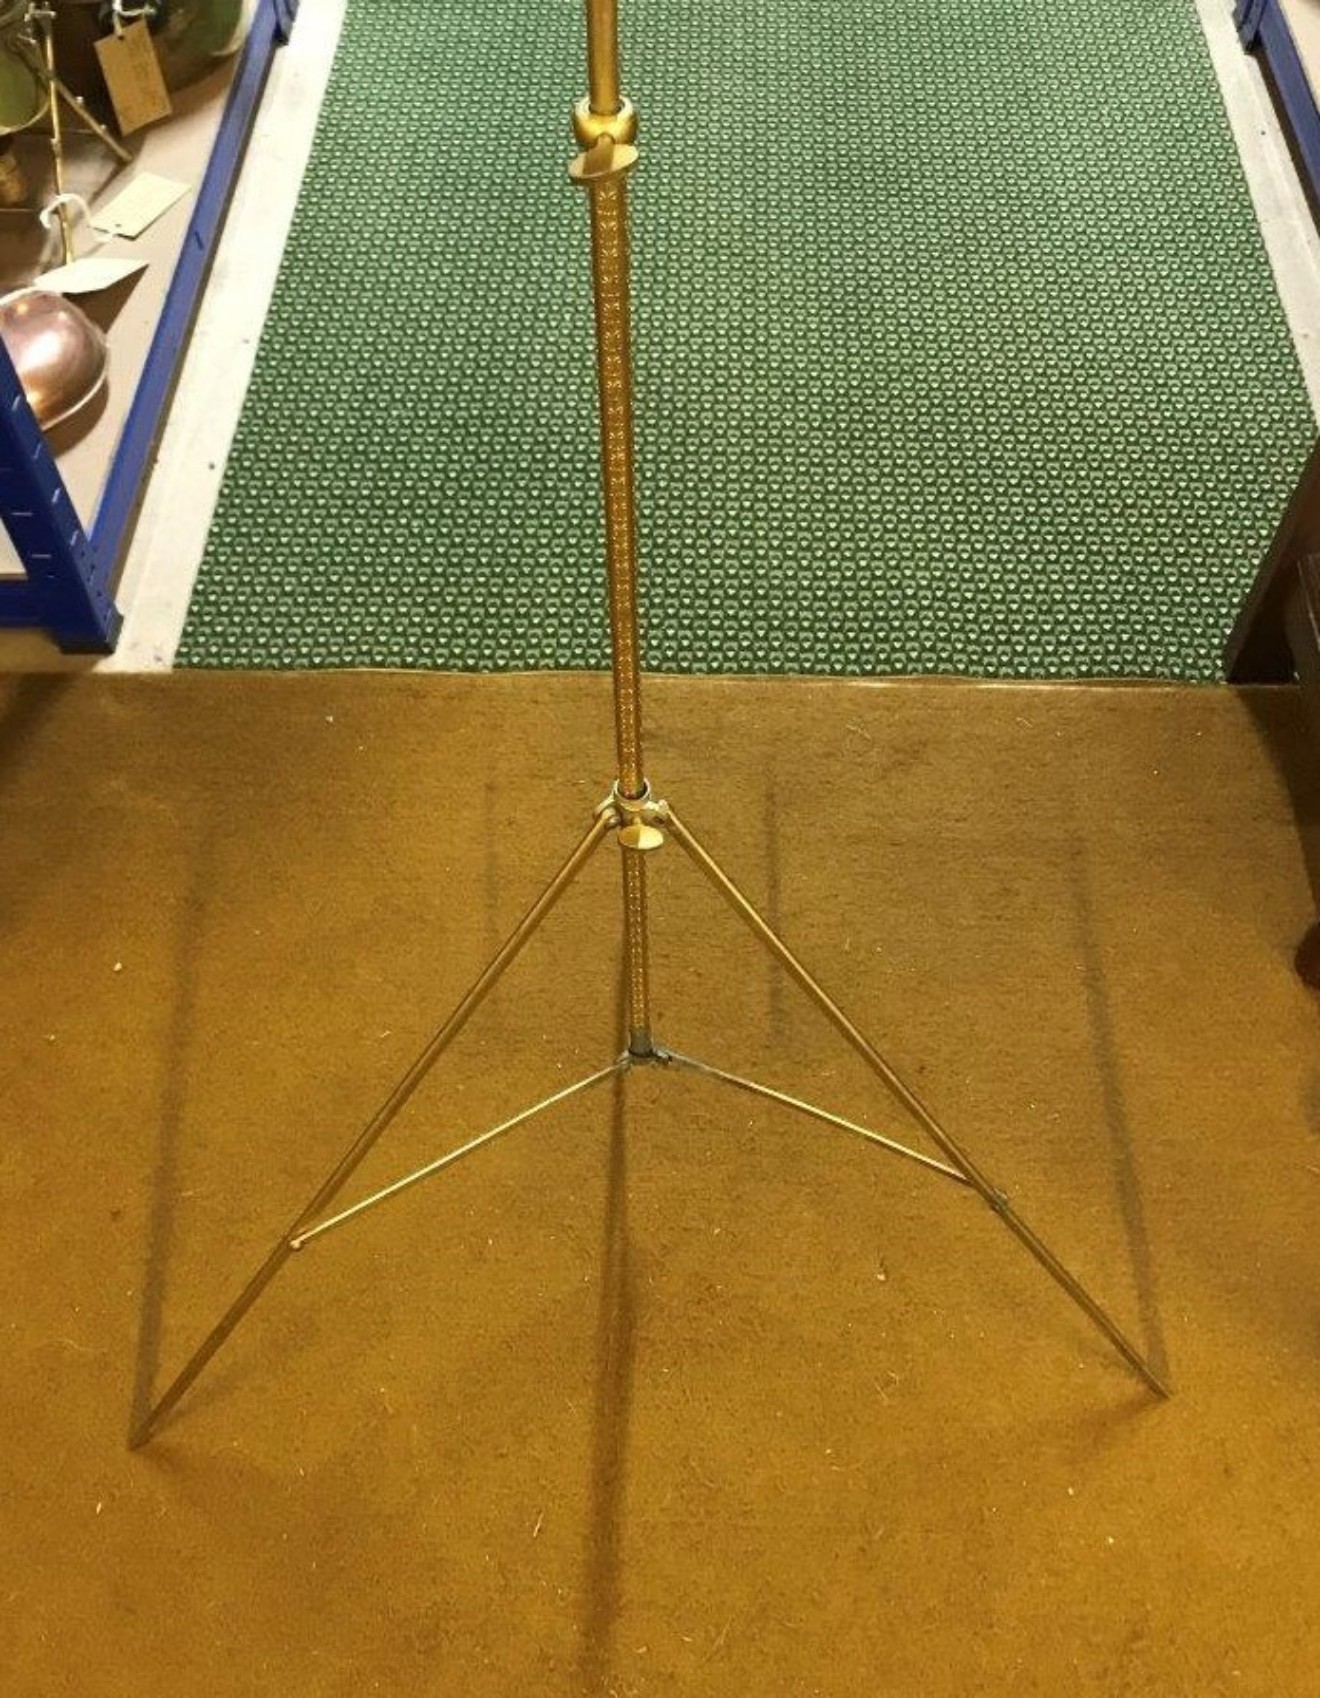 Rare Antique Portable Brass Music Stand complete with Carrying Case Harrow & Co London Circa 1880